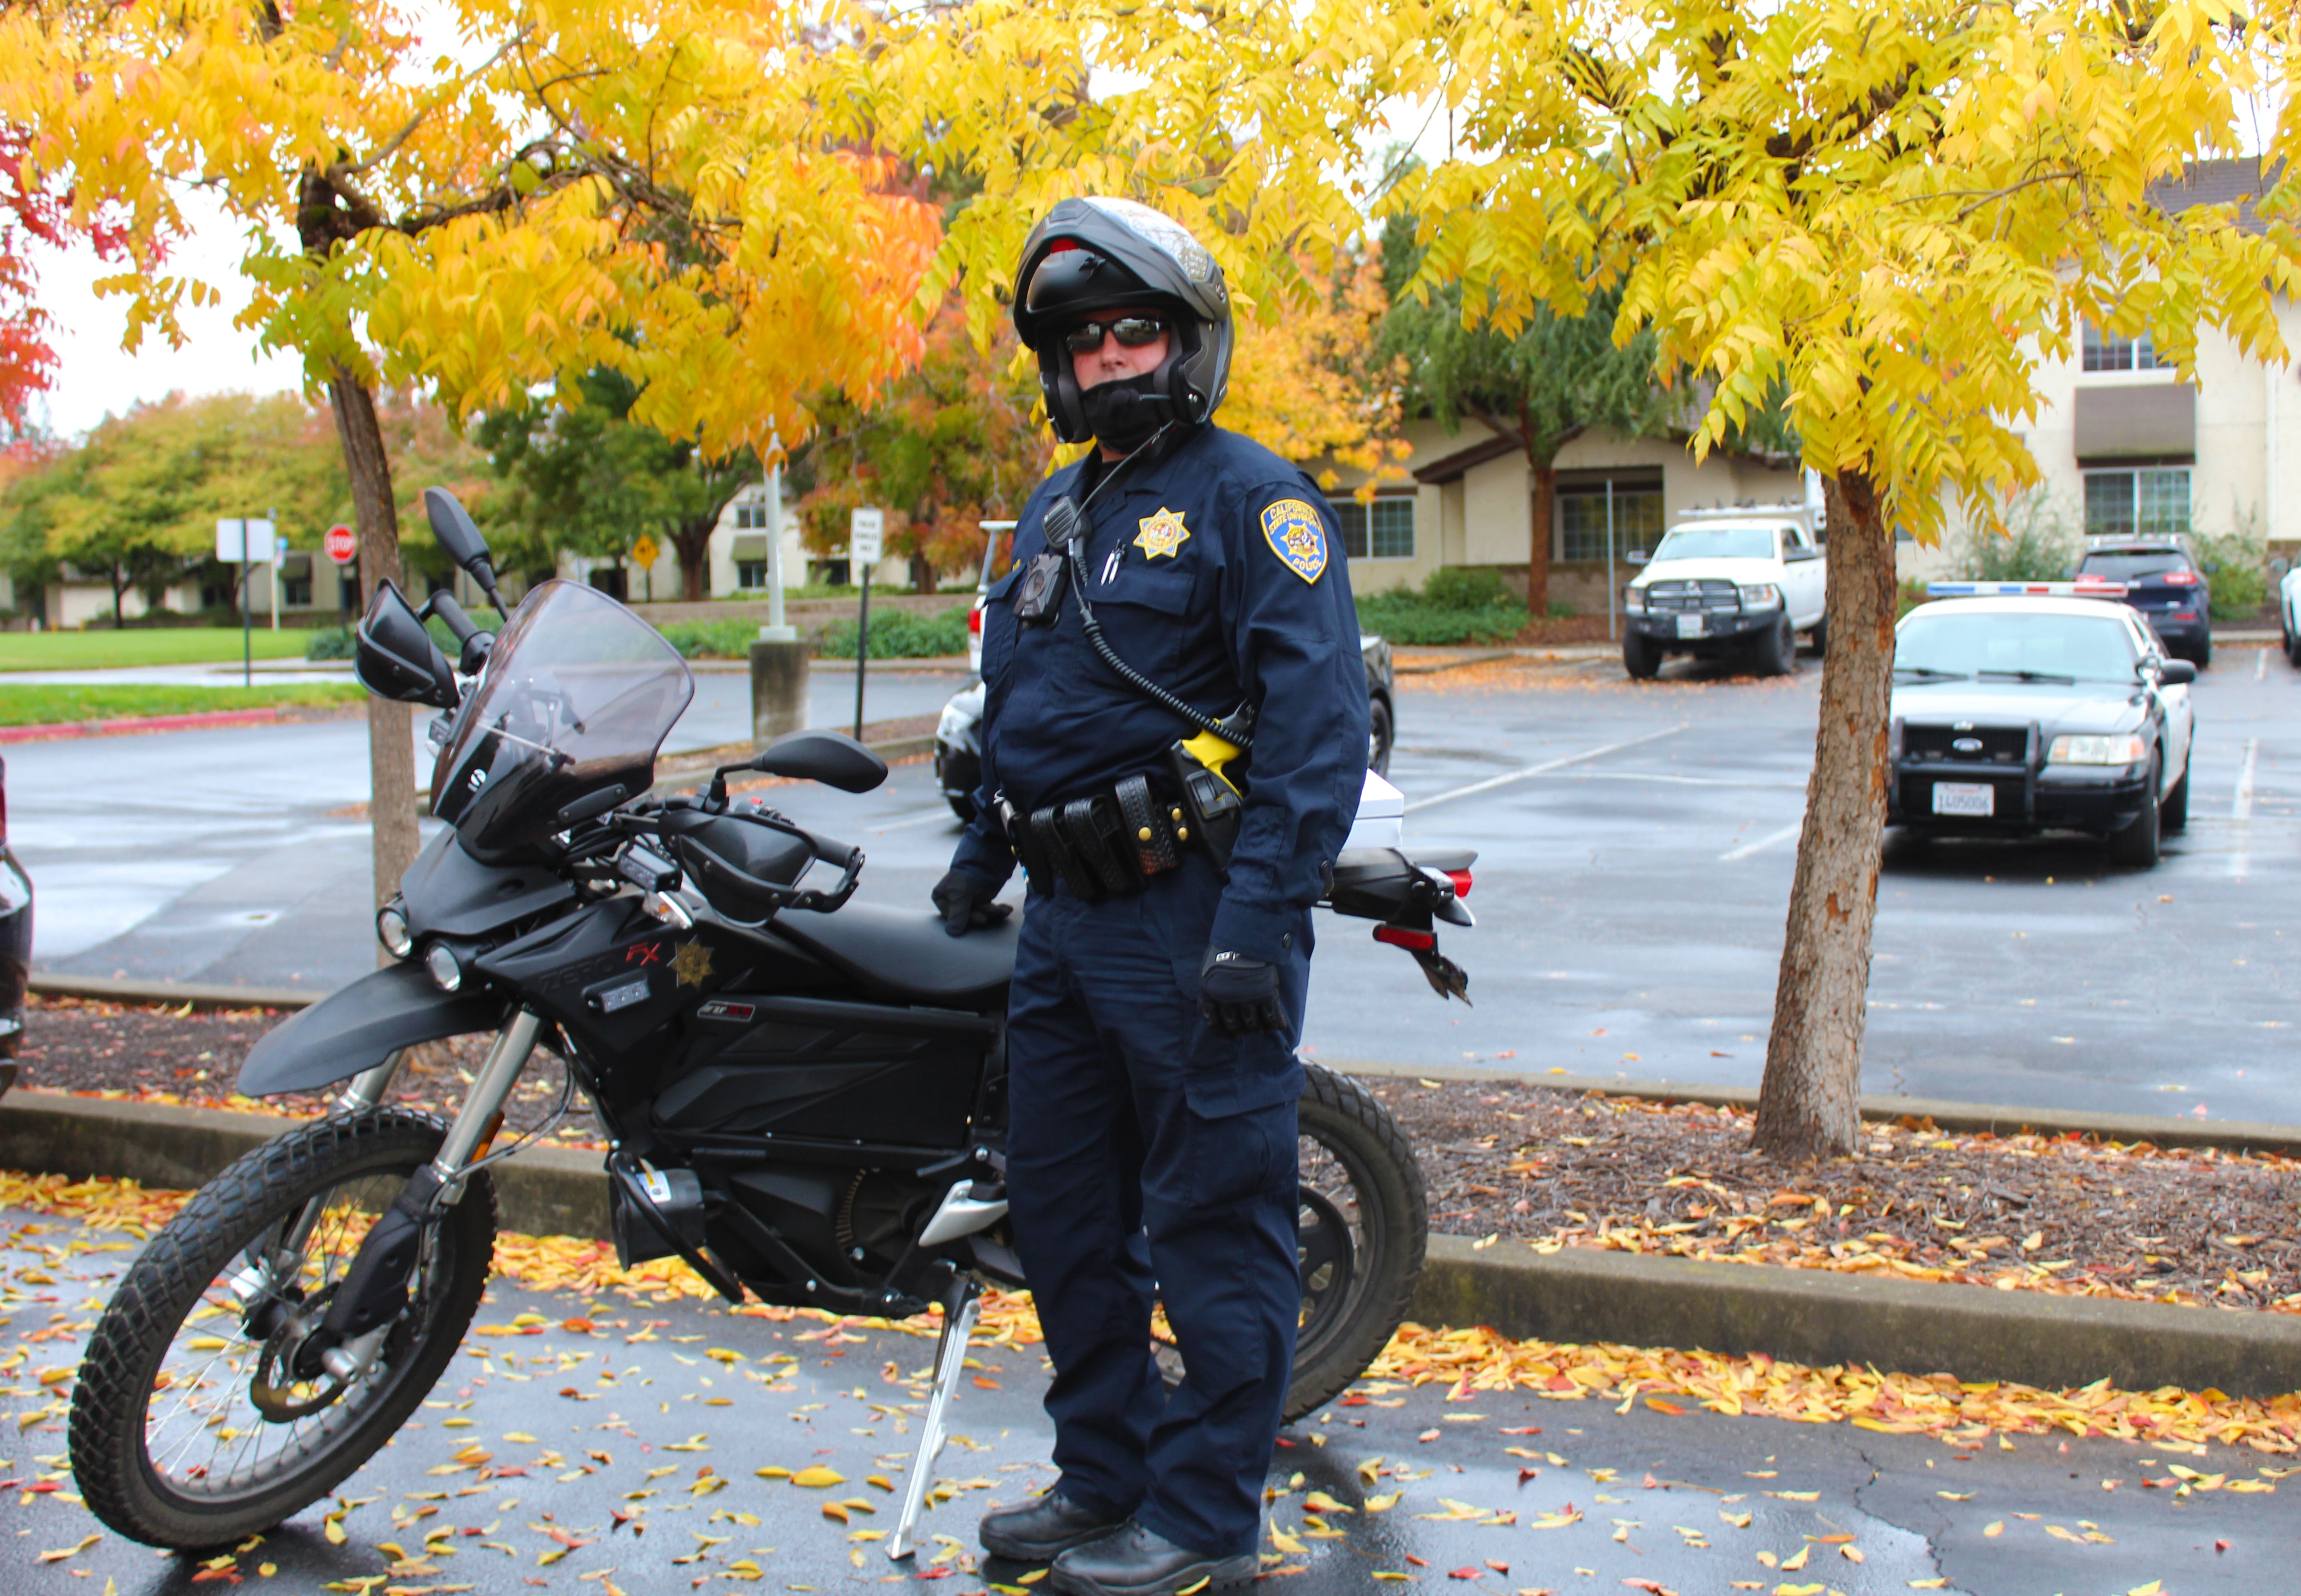 officer on motorcycle